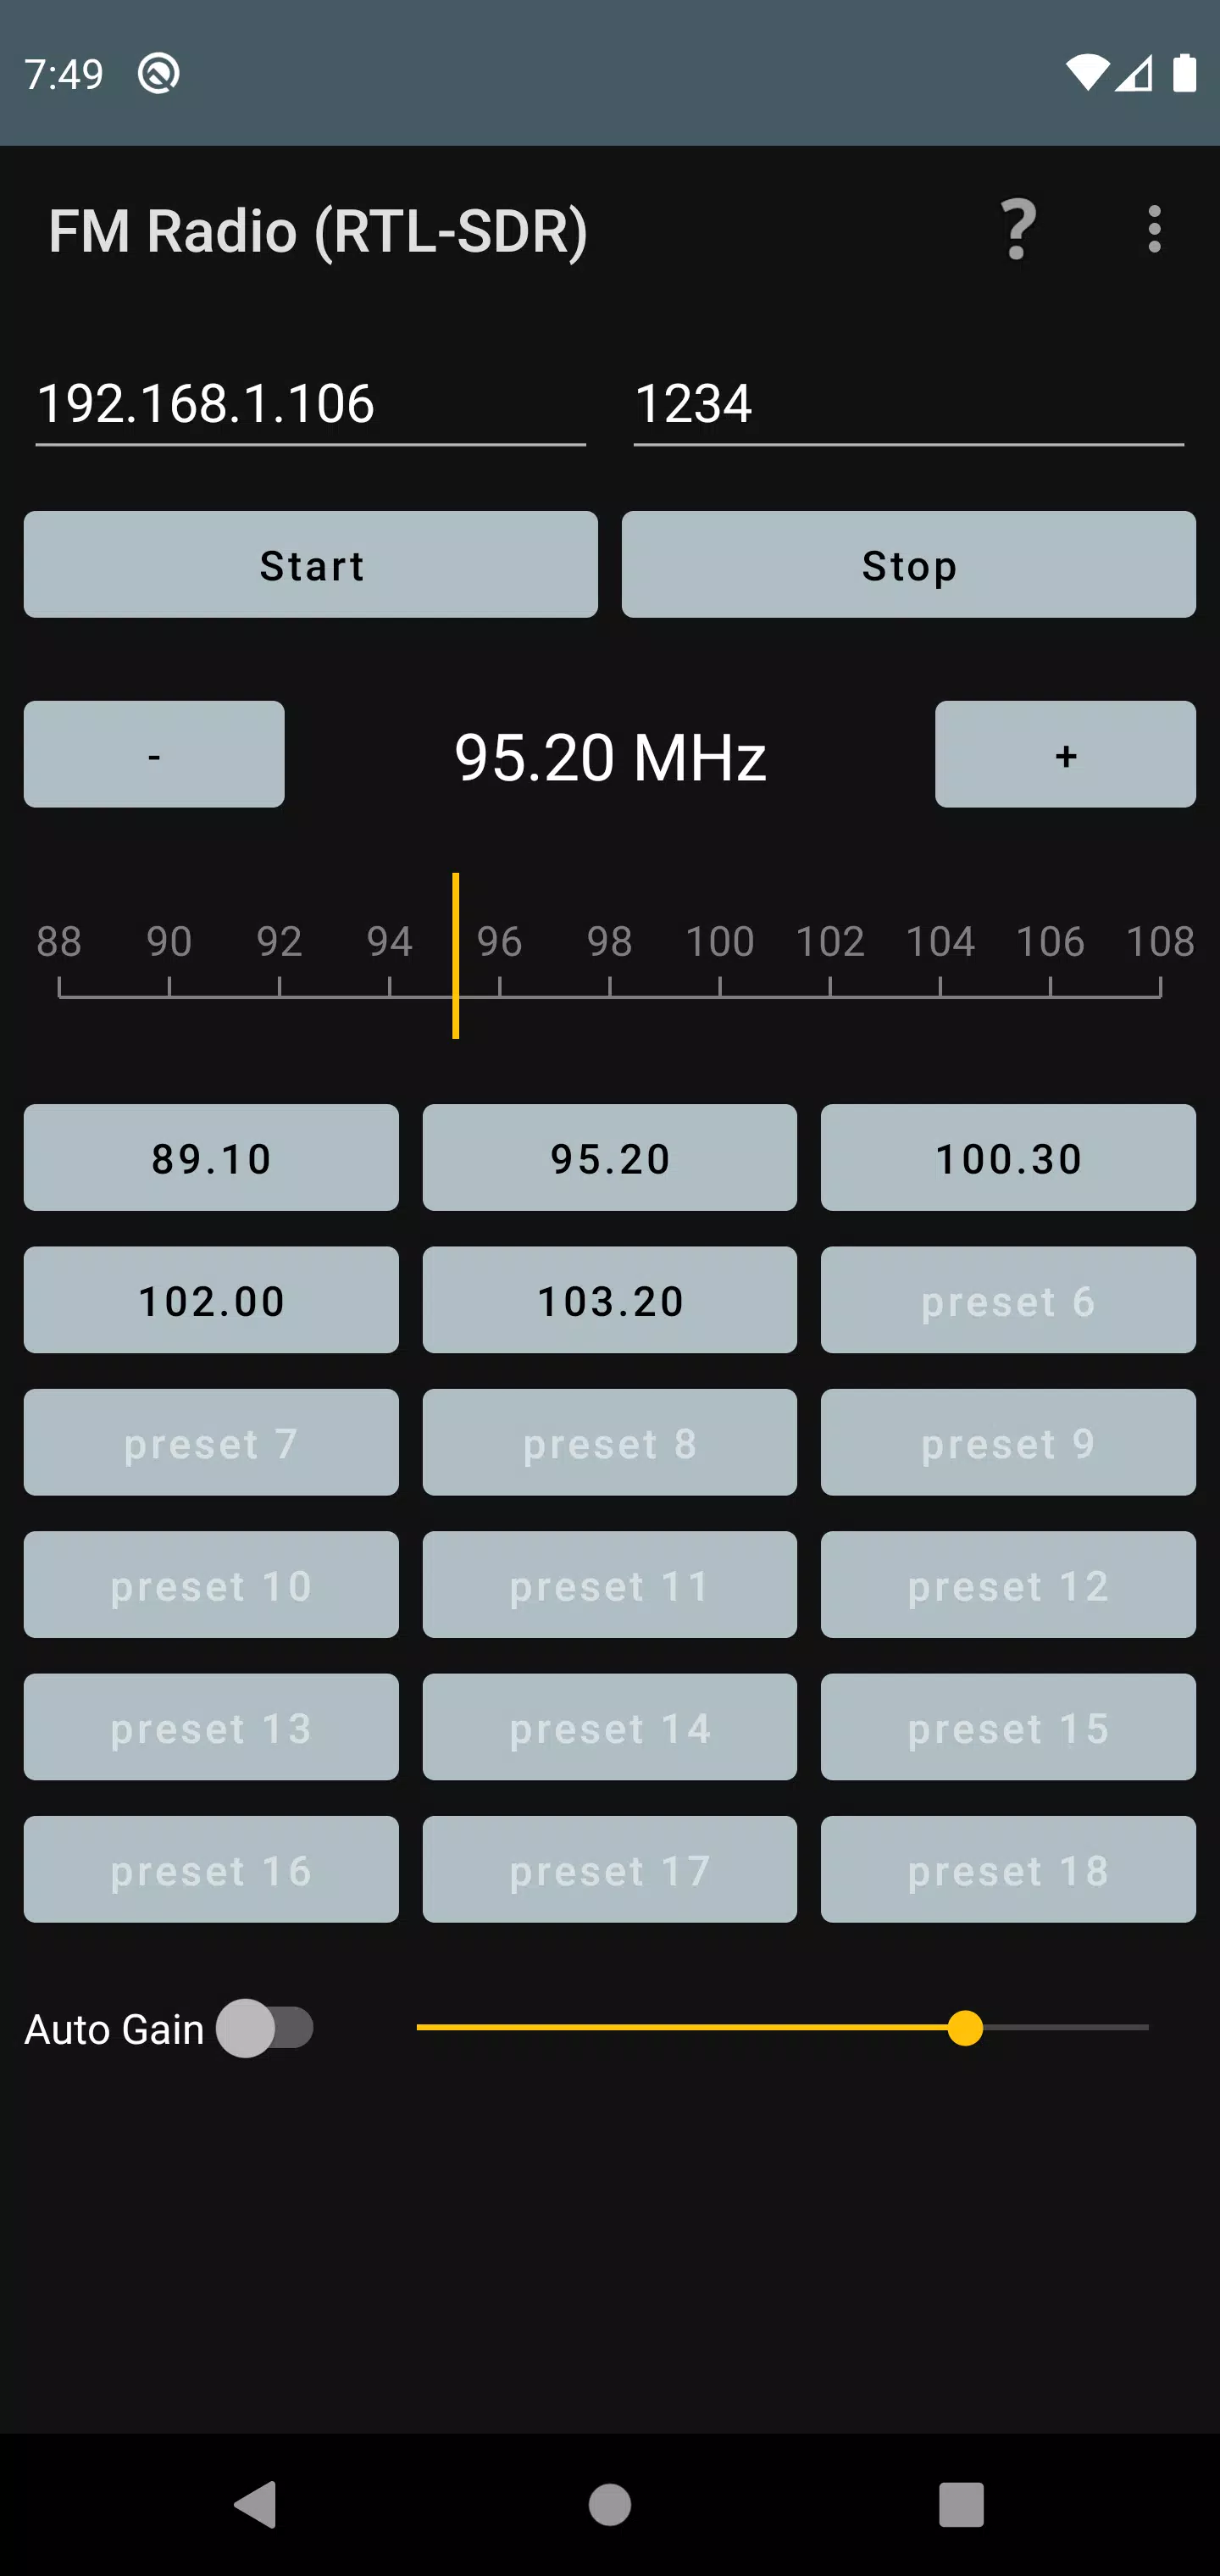 FM Radio (RTL-SDR) for Android - APK Download